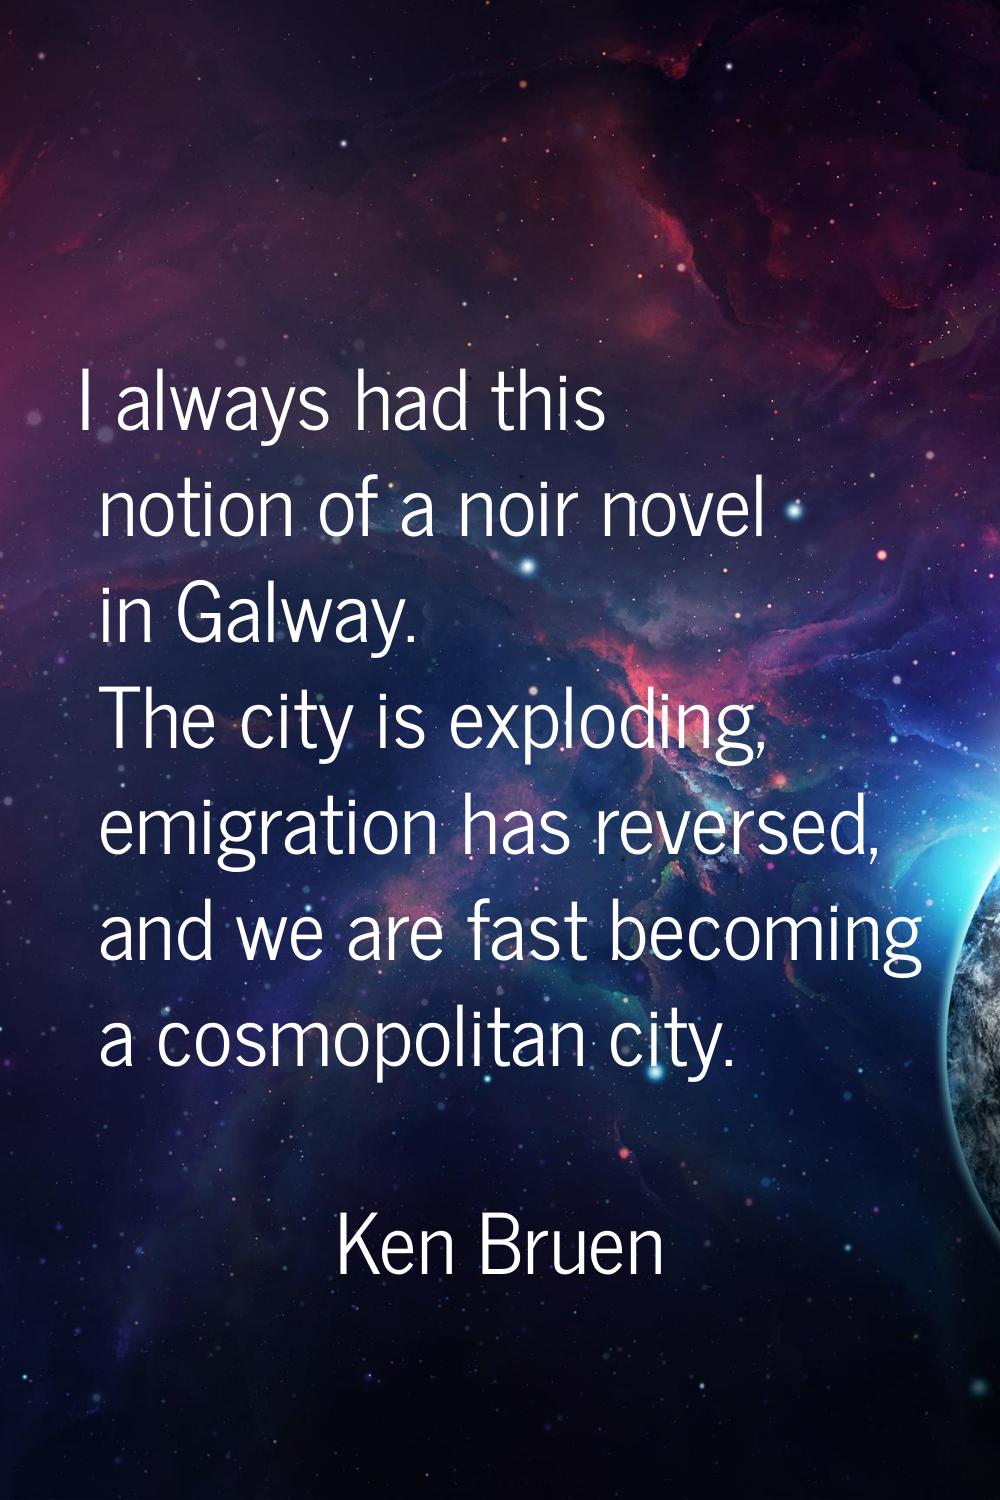 I always had this notion of a noir novel in Galway. The city is exploding, emigration has reversed,